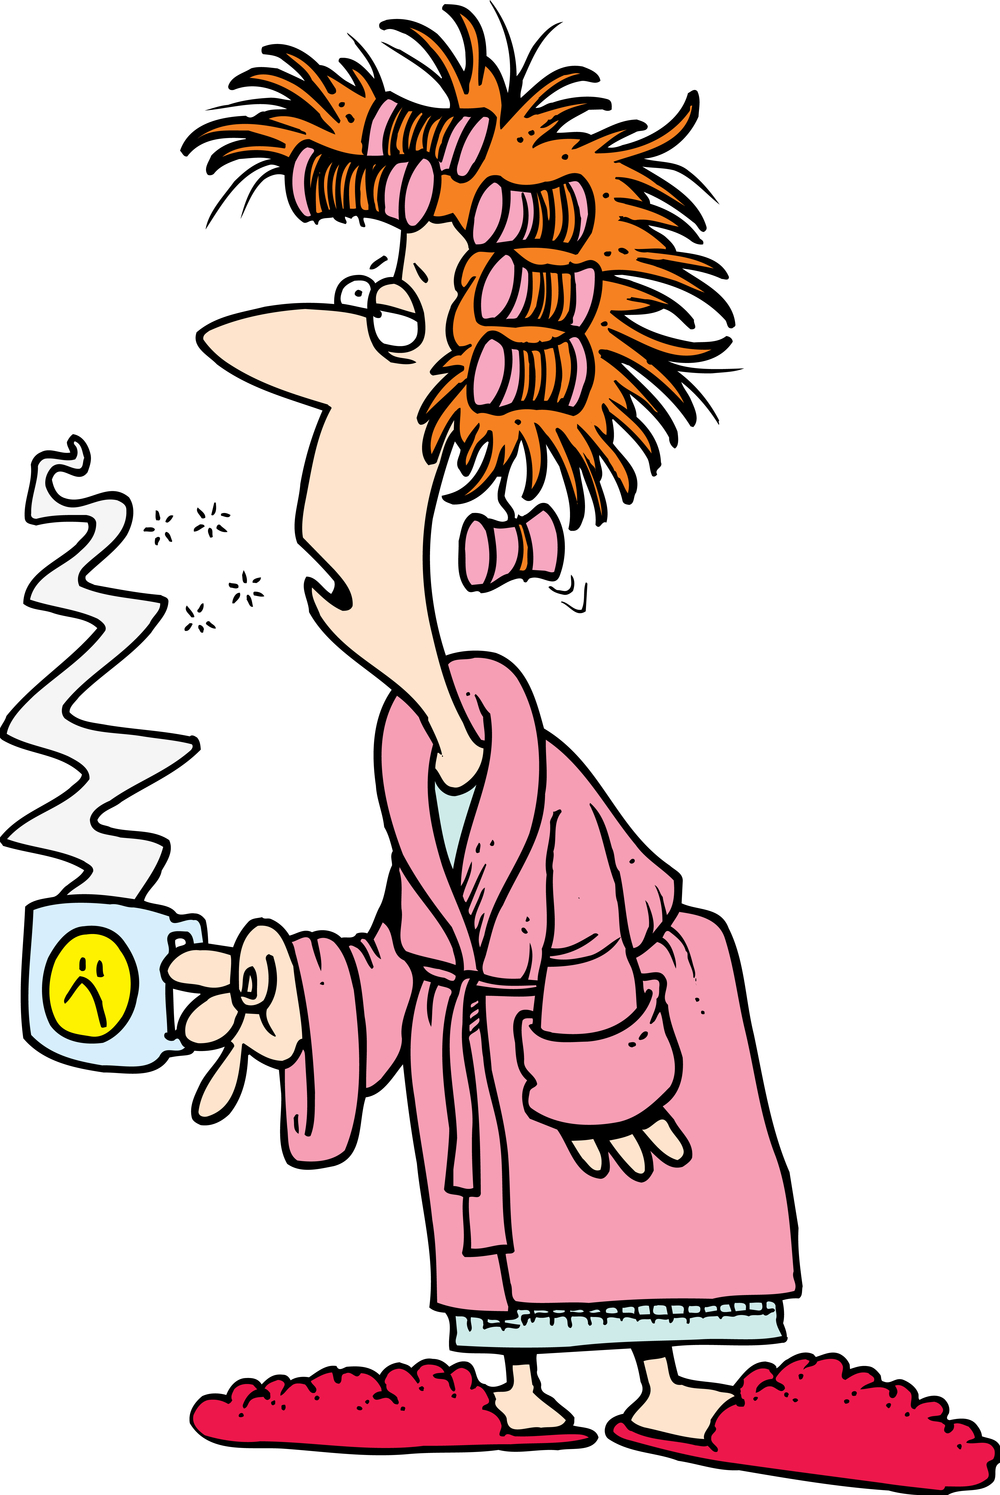 Exhausted Woman Cartoon - Woman Clipart Exhausted Cartoon Tired Lady ...